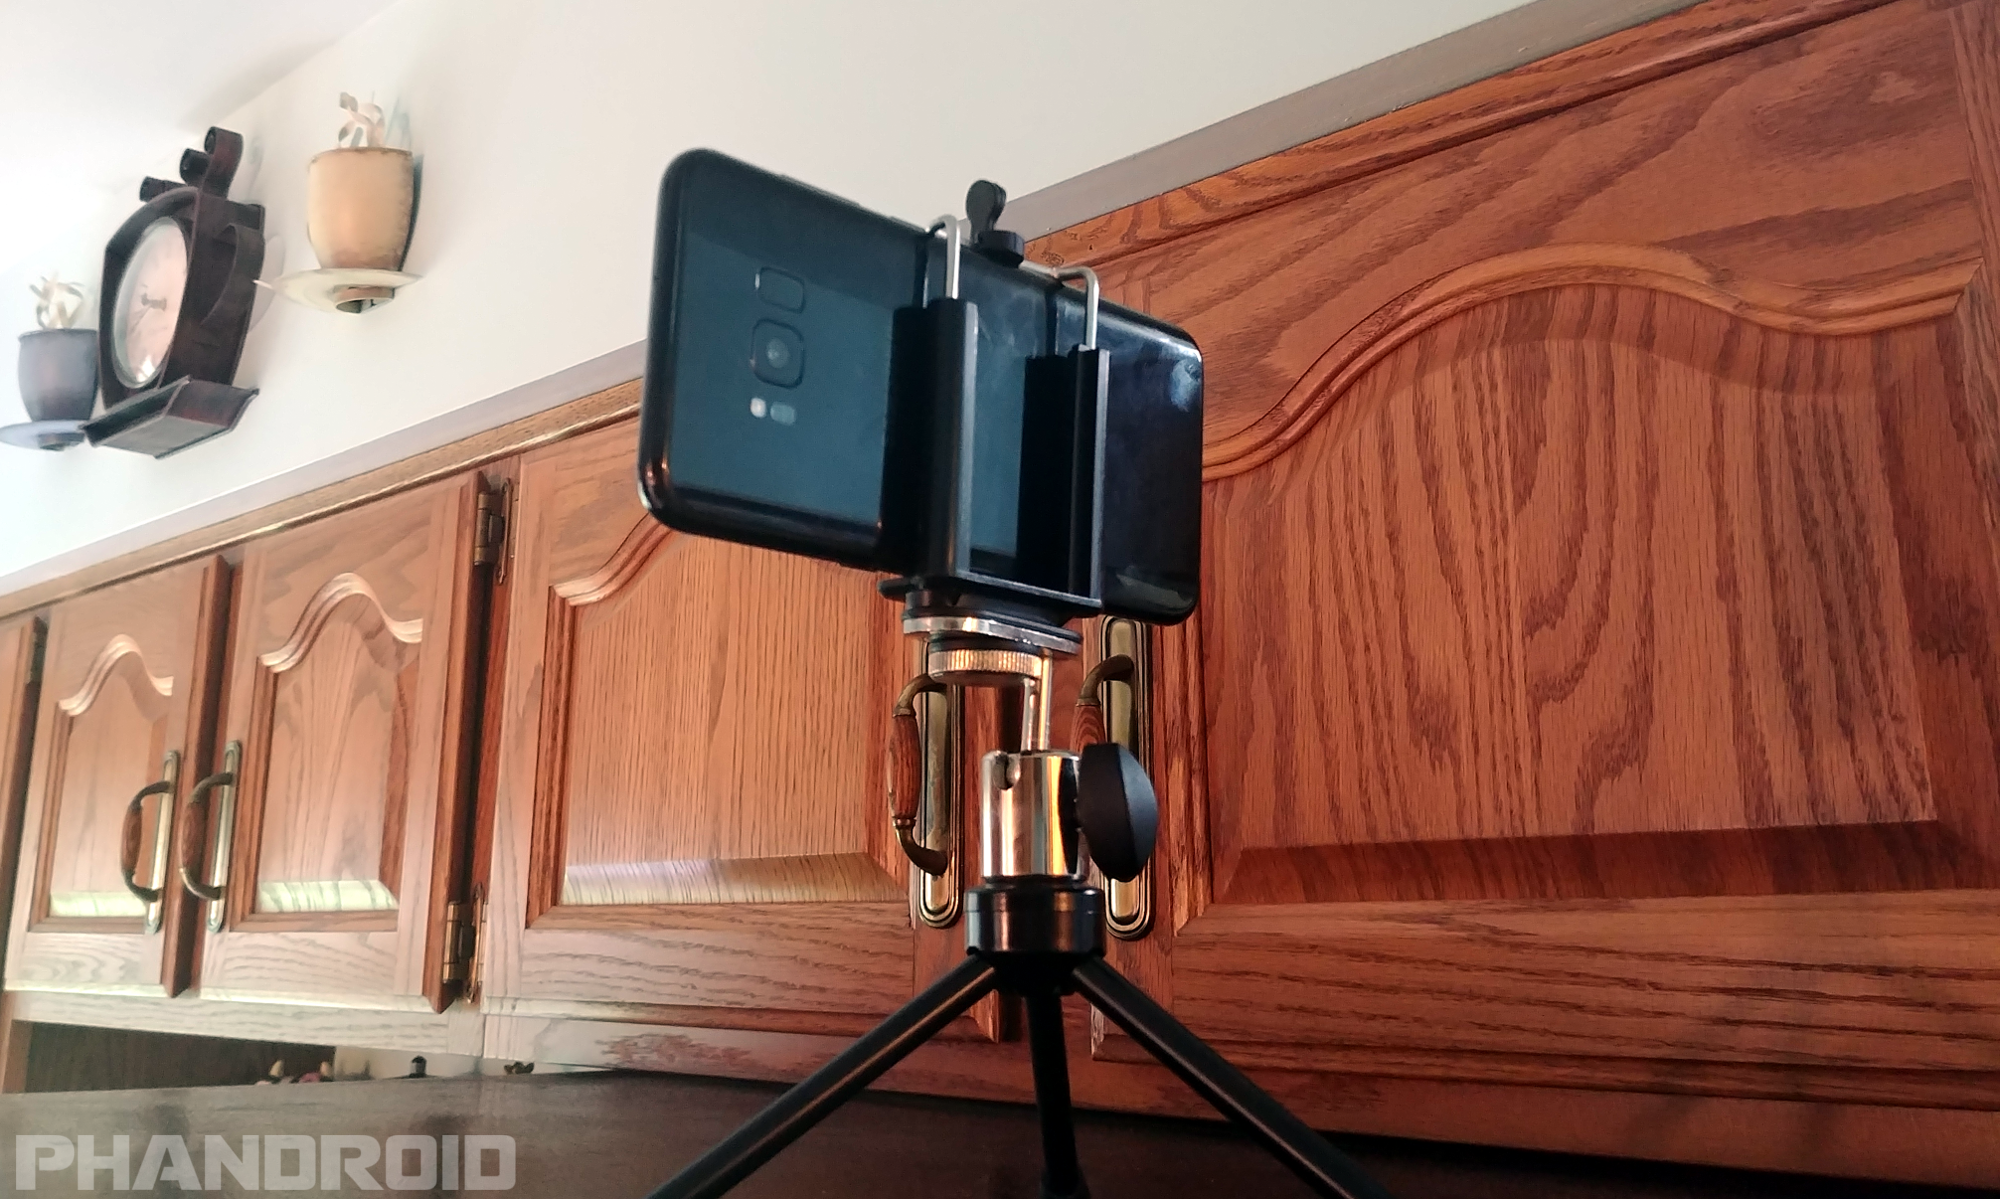 use an old android phone as a security camera